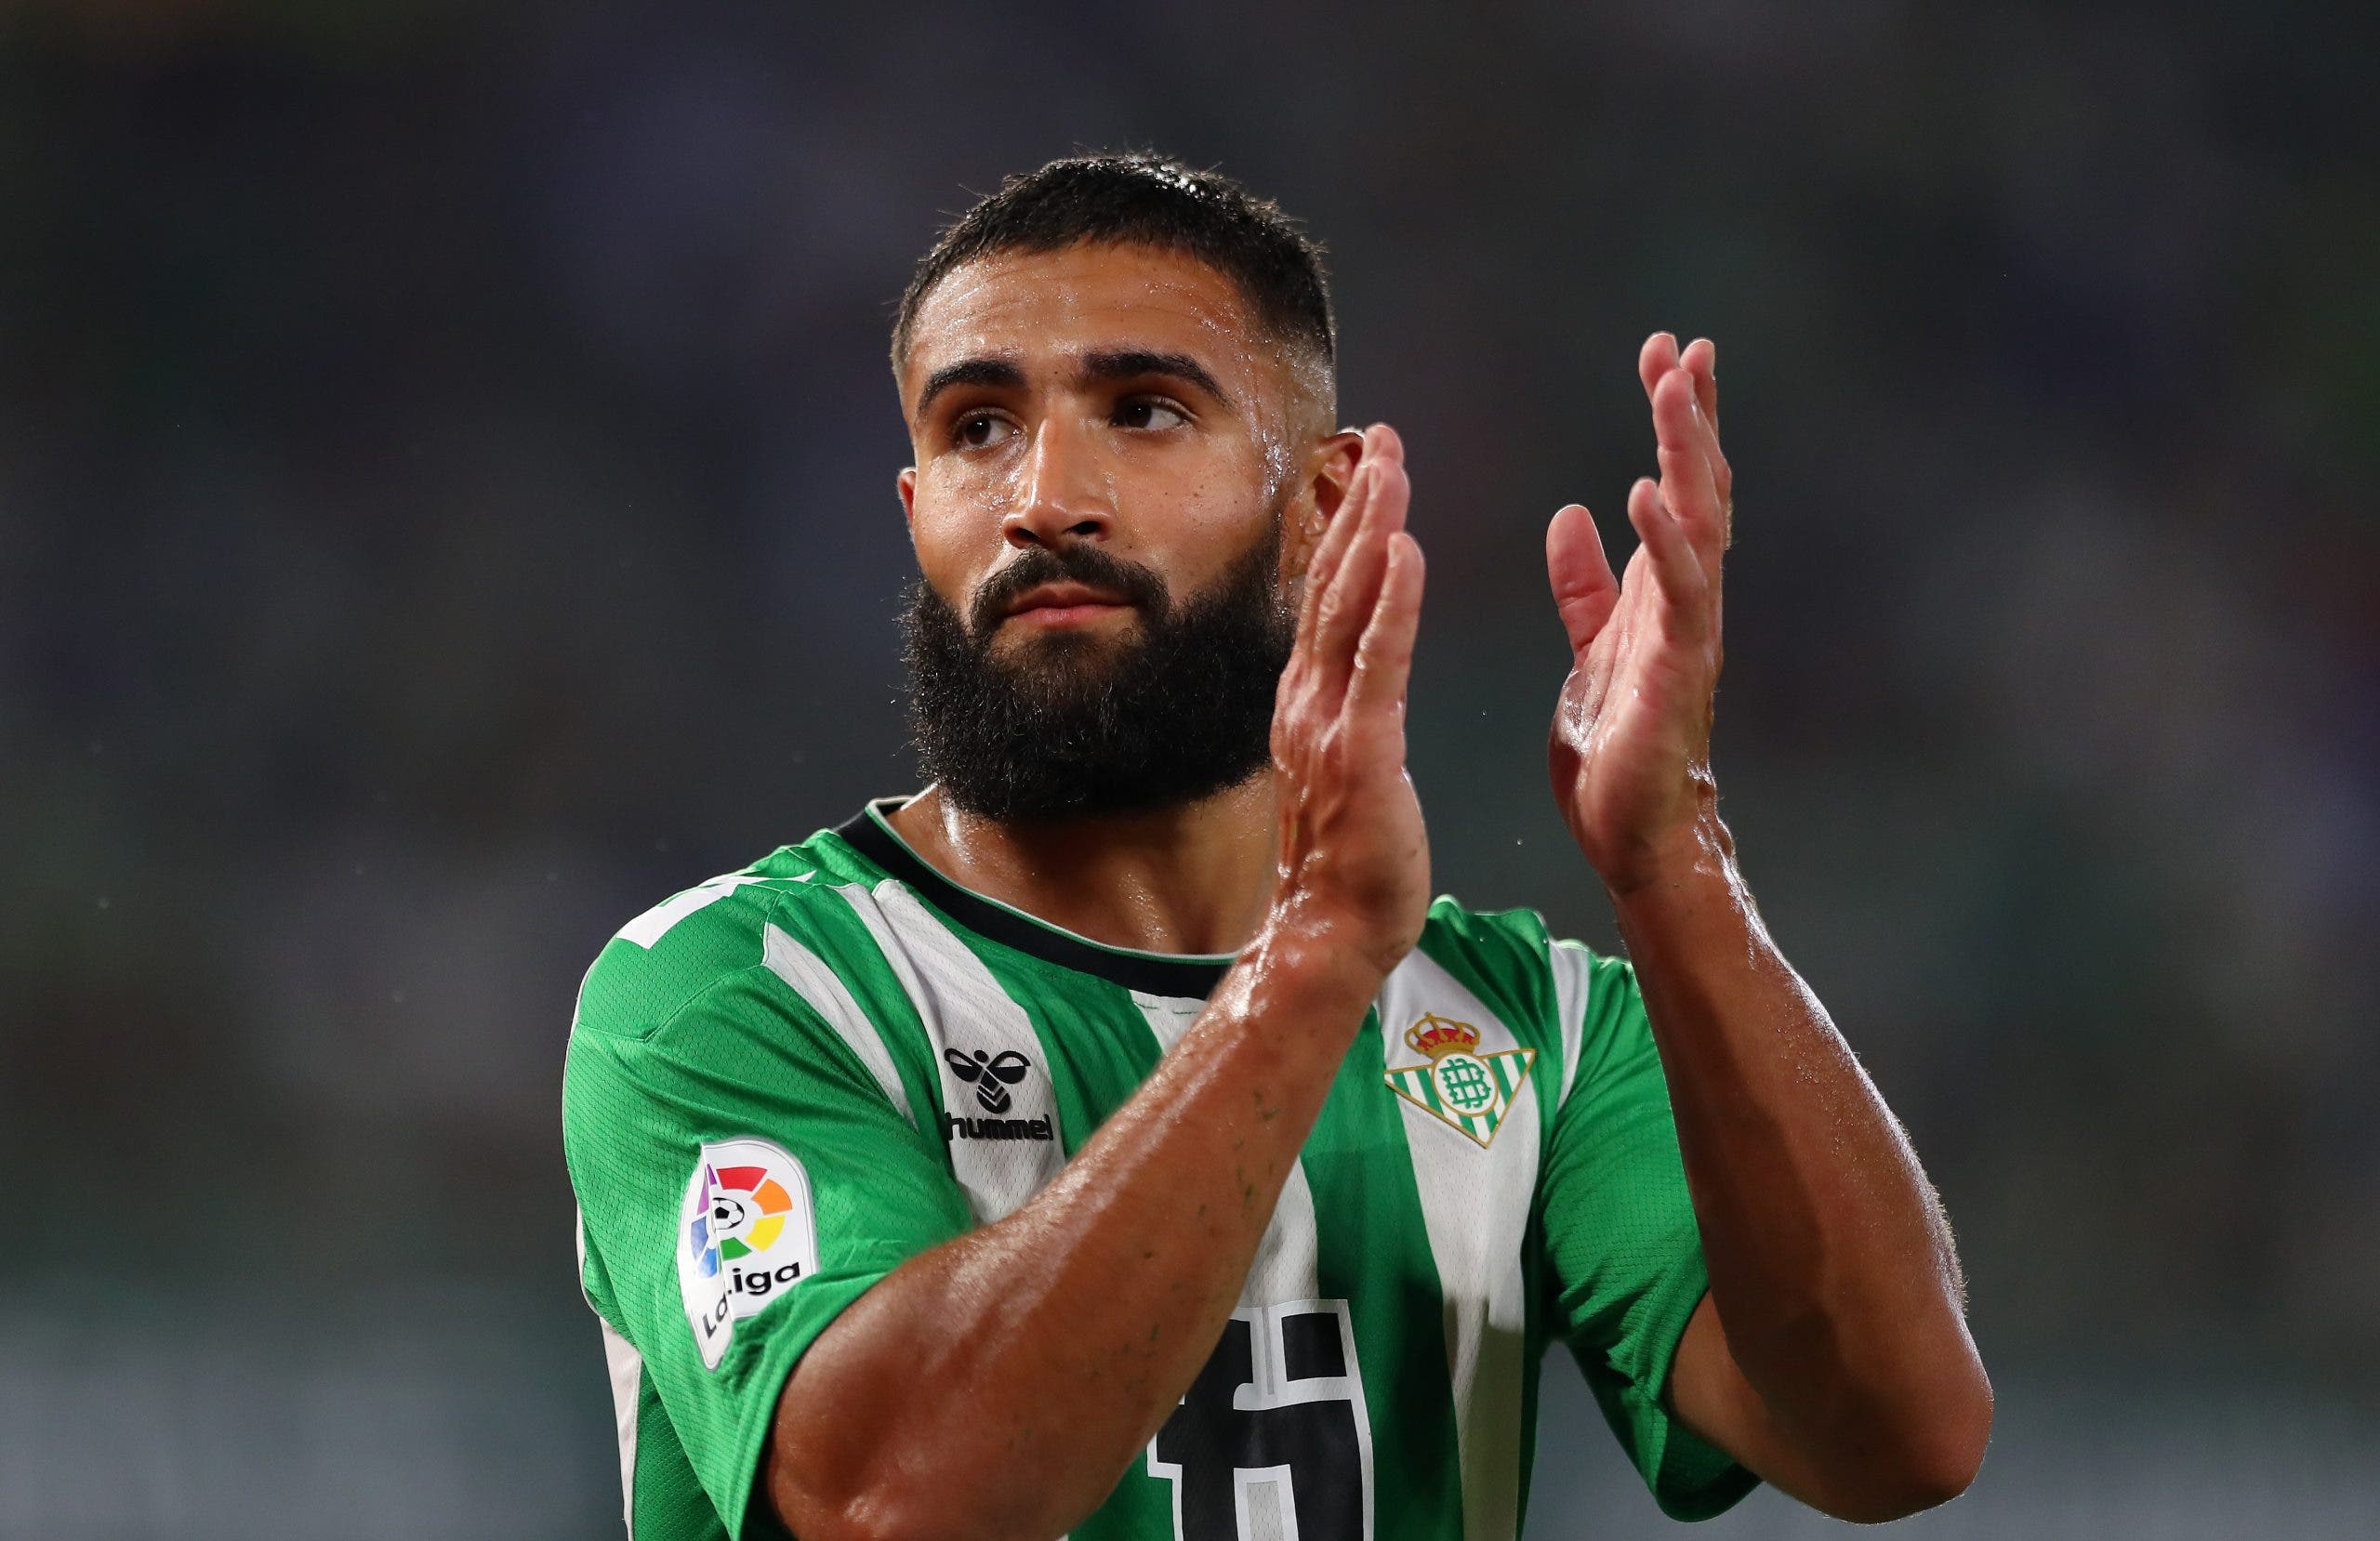 The pearl that Betis wants to forget Fekir
	
